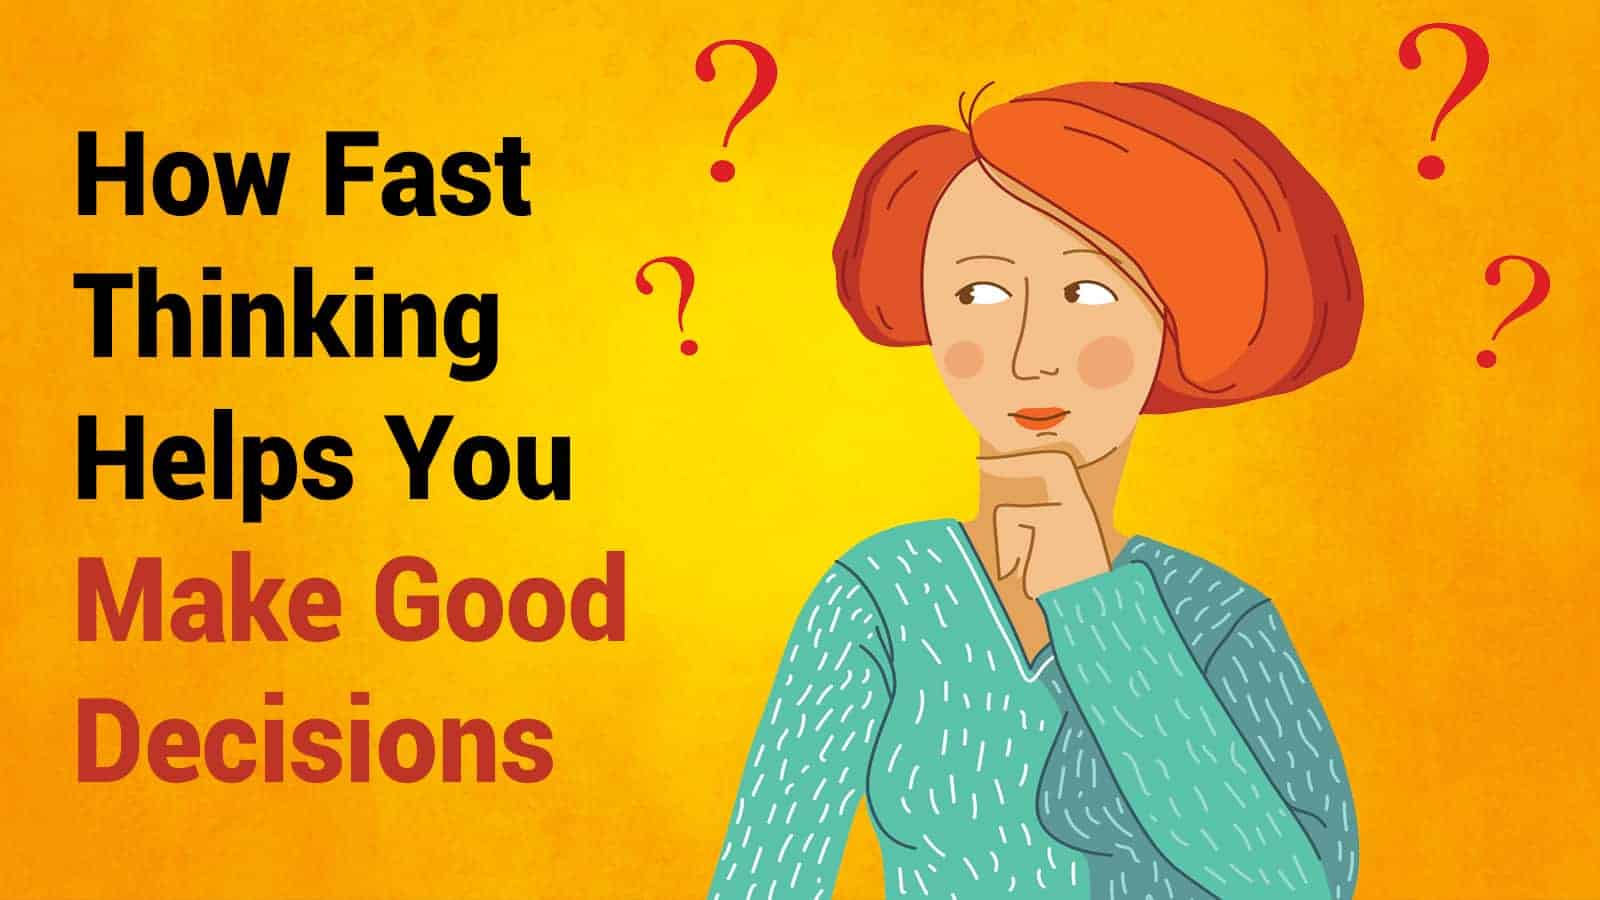 How Fast Thinking Helps You Make Good Decisions